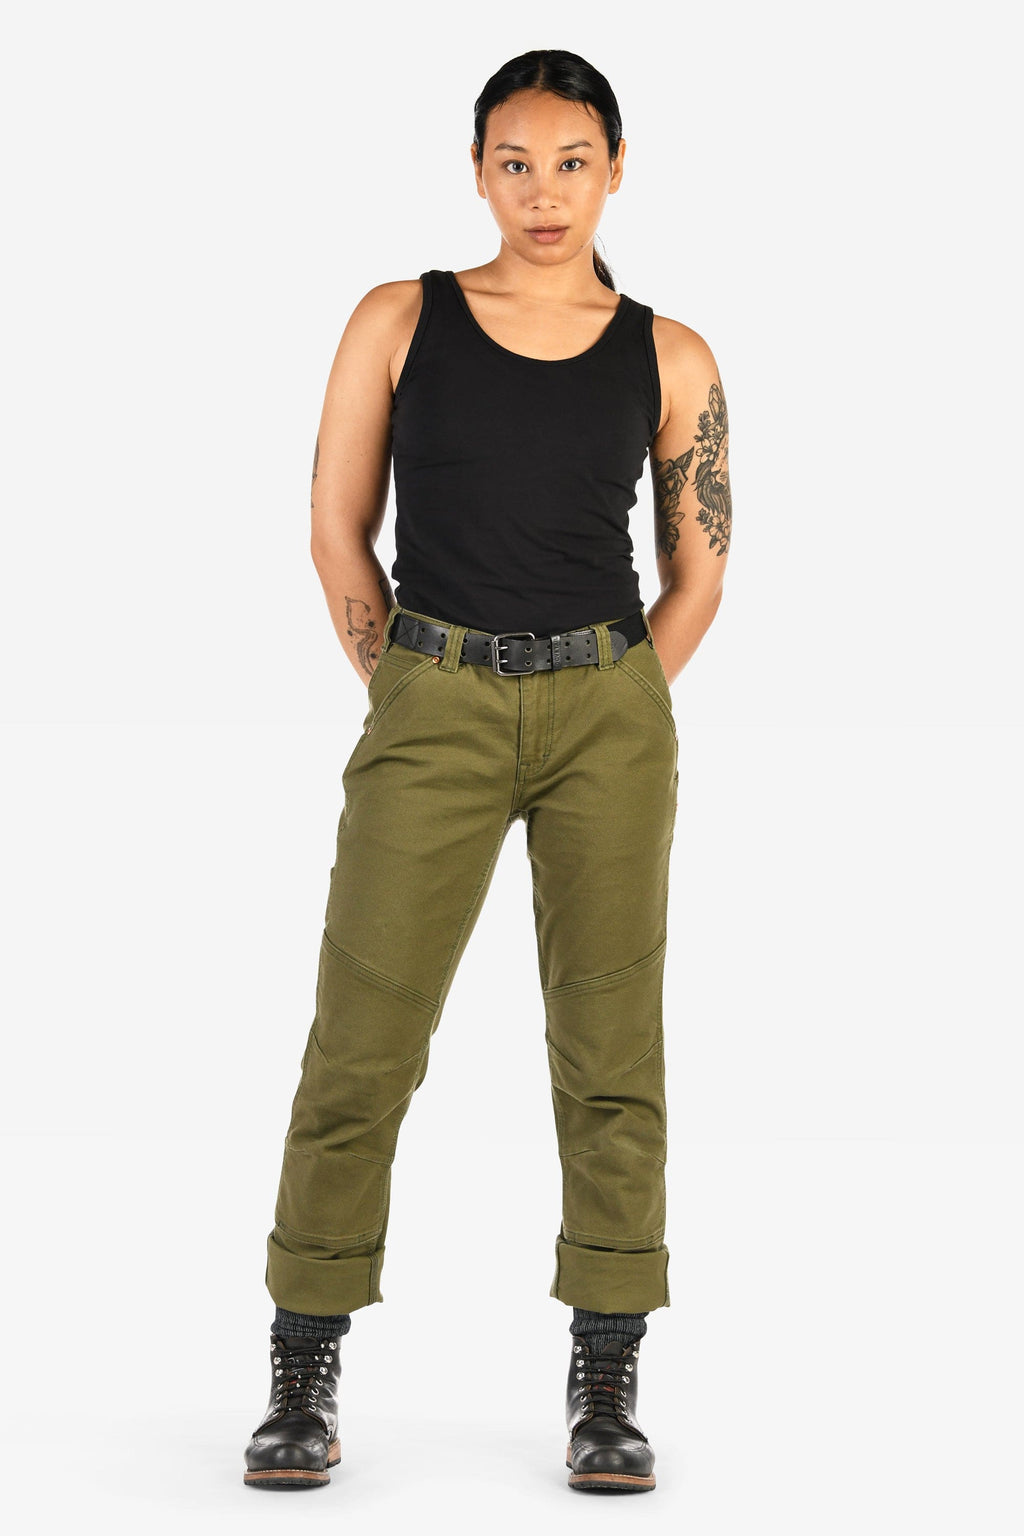 GO TO™ Stretch Canvas Pants in Kelp Green Work Pants Dovetail Workwear